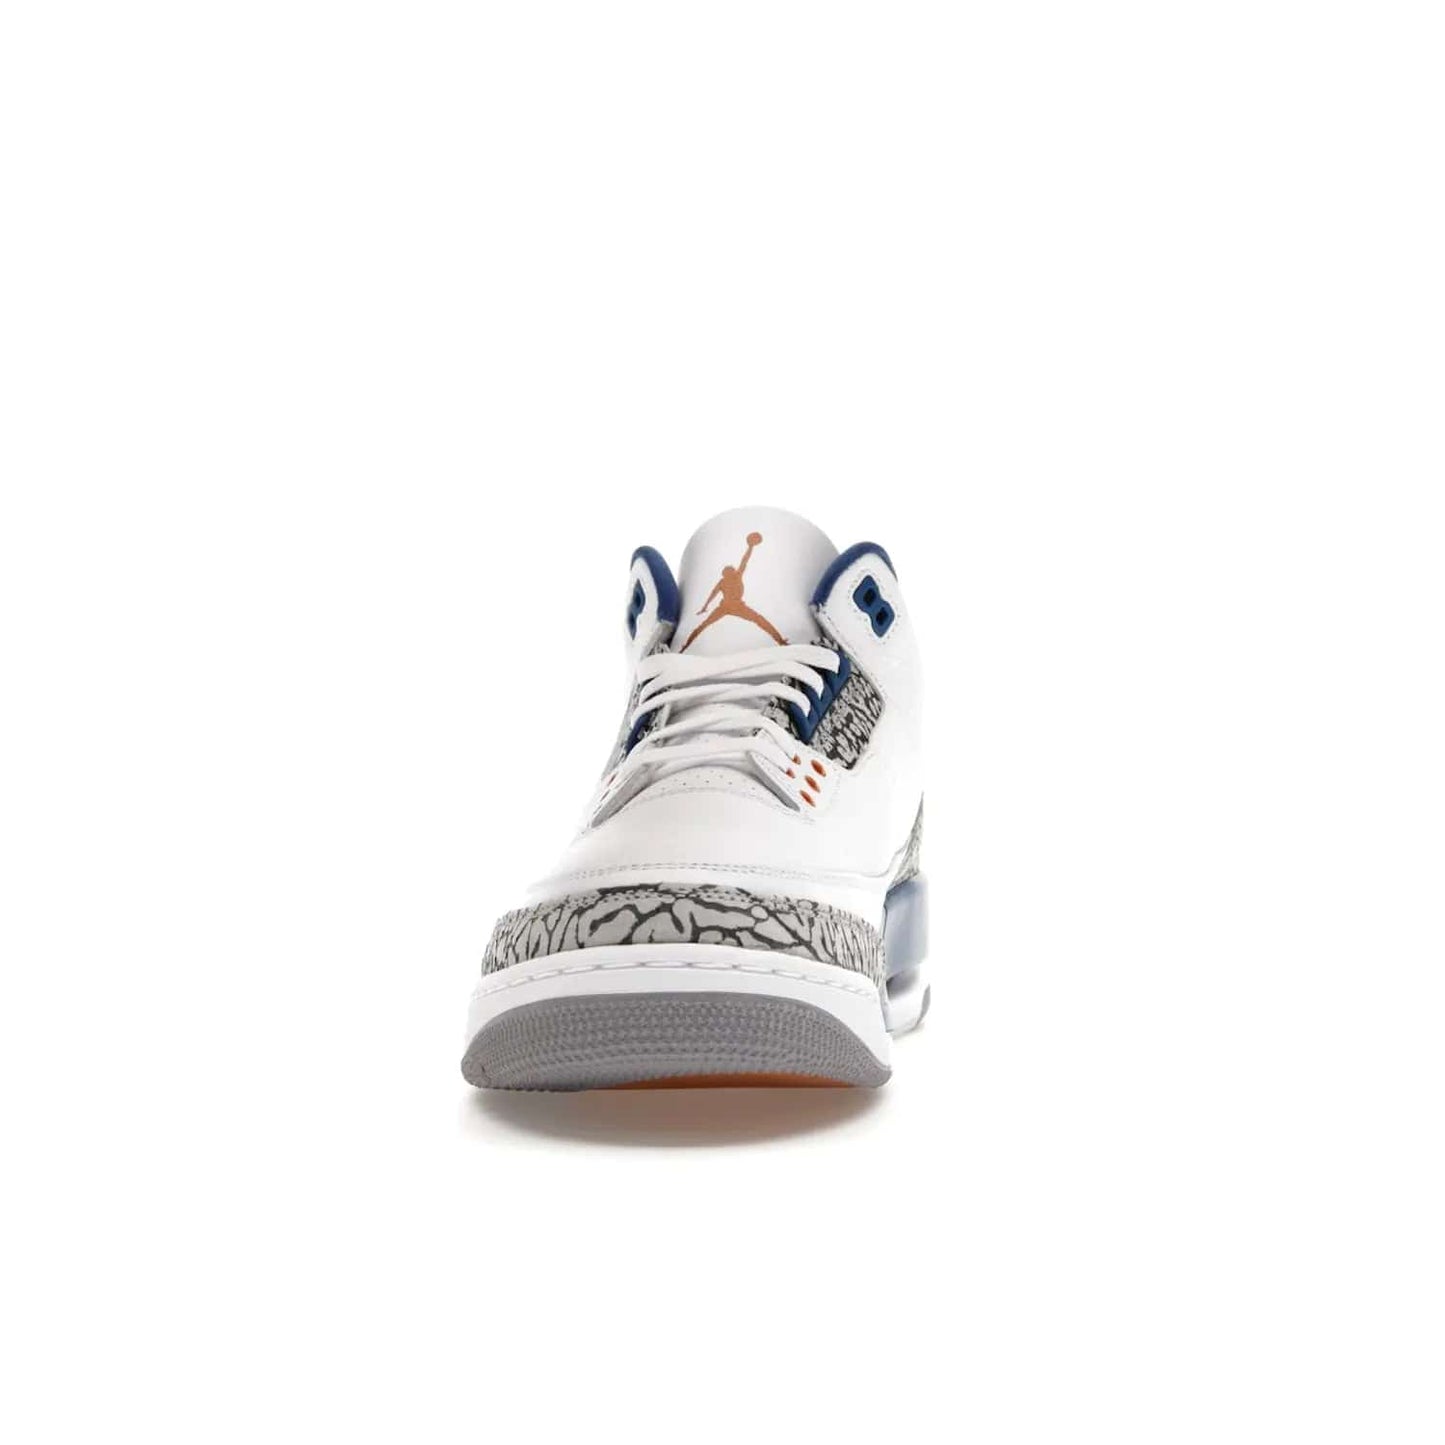 Jordan 3 Retro Wizards - Image 11 - Only at www.BallersClubKickz.com - ##
Special tribute sneaker from Jordan Brand to Michael Jordan's time with the Washington Wizards. Iconic white upper, orange Jumpman logo, blue accents, metallic copper details, and cement grey outsole. Buy the Air Jordan 3 Retro Wizards April 29, 2023.